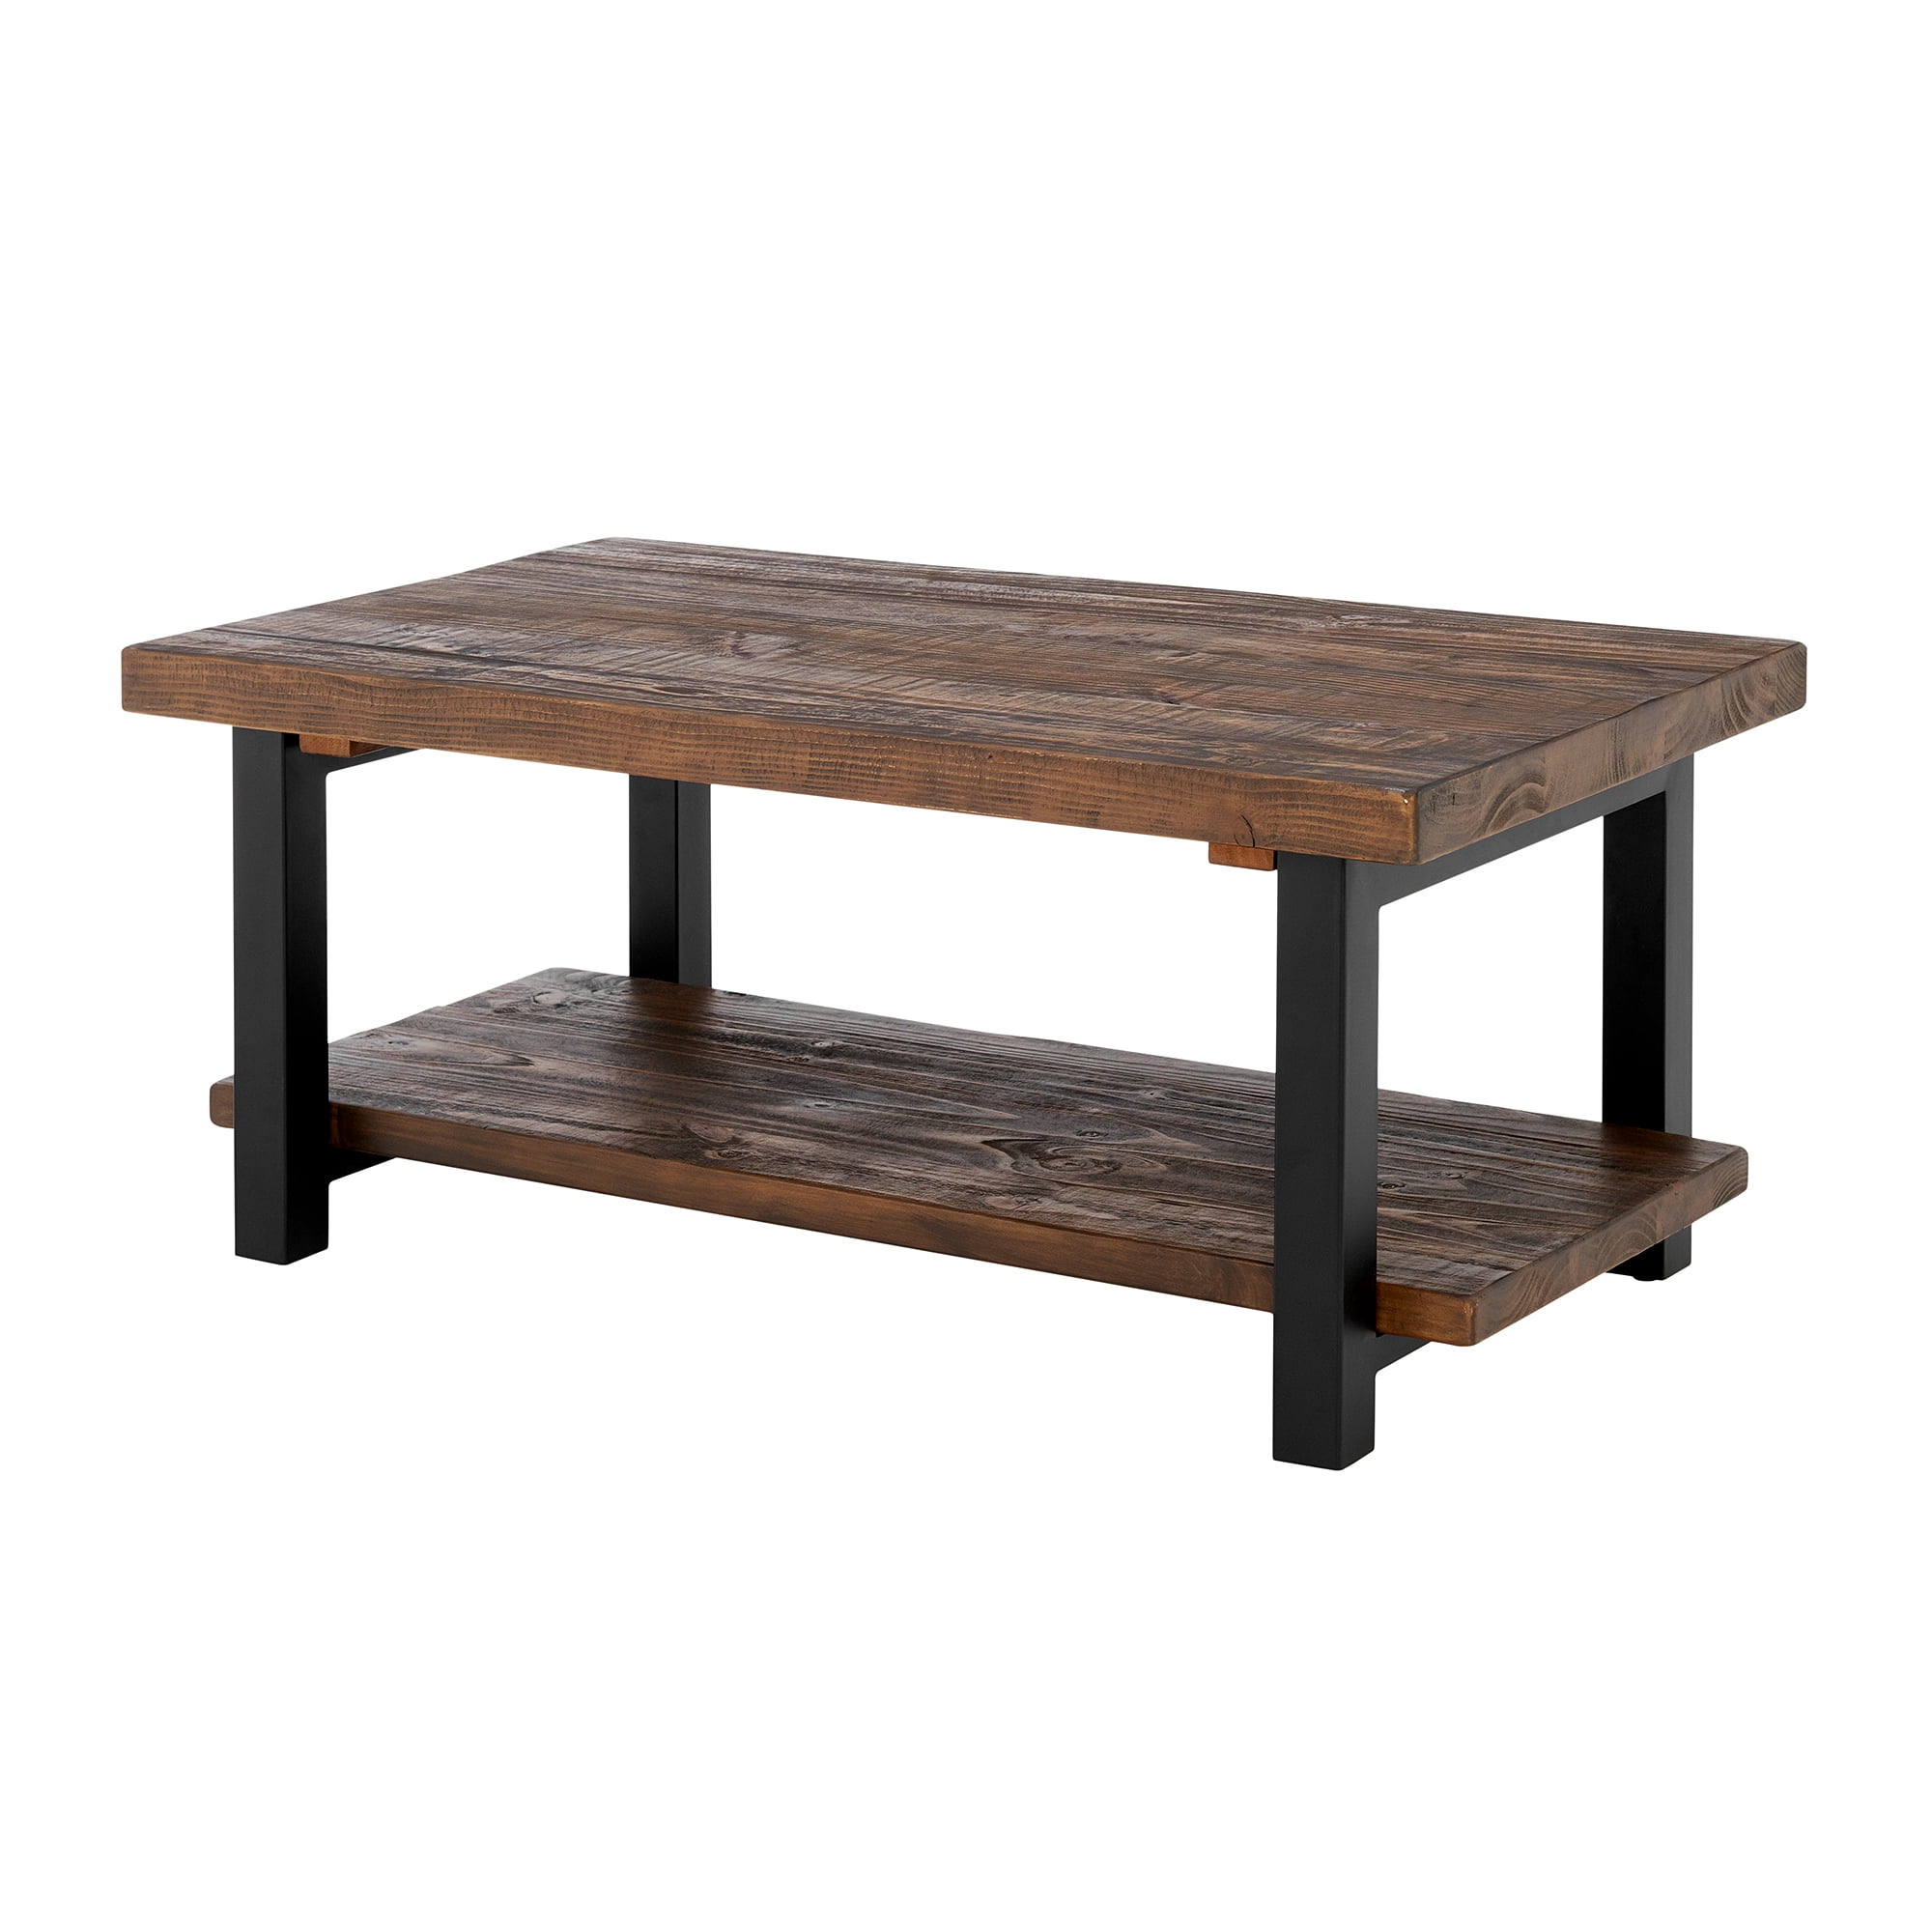 42" Pomona Wide Coffee Table Reclaimed Wood Rustic Natural - Alaterre Furniture